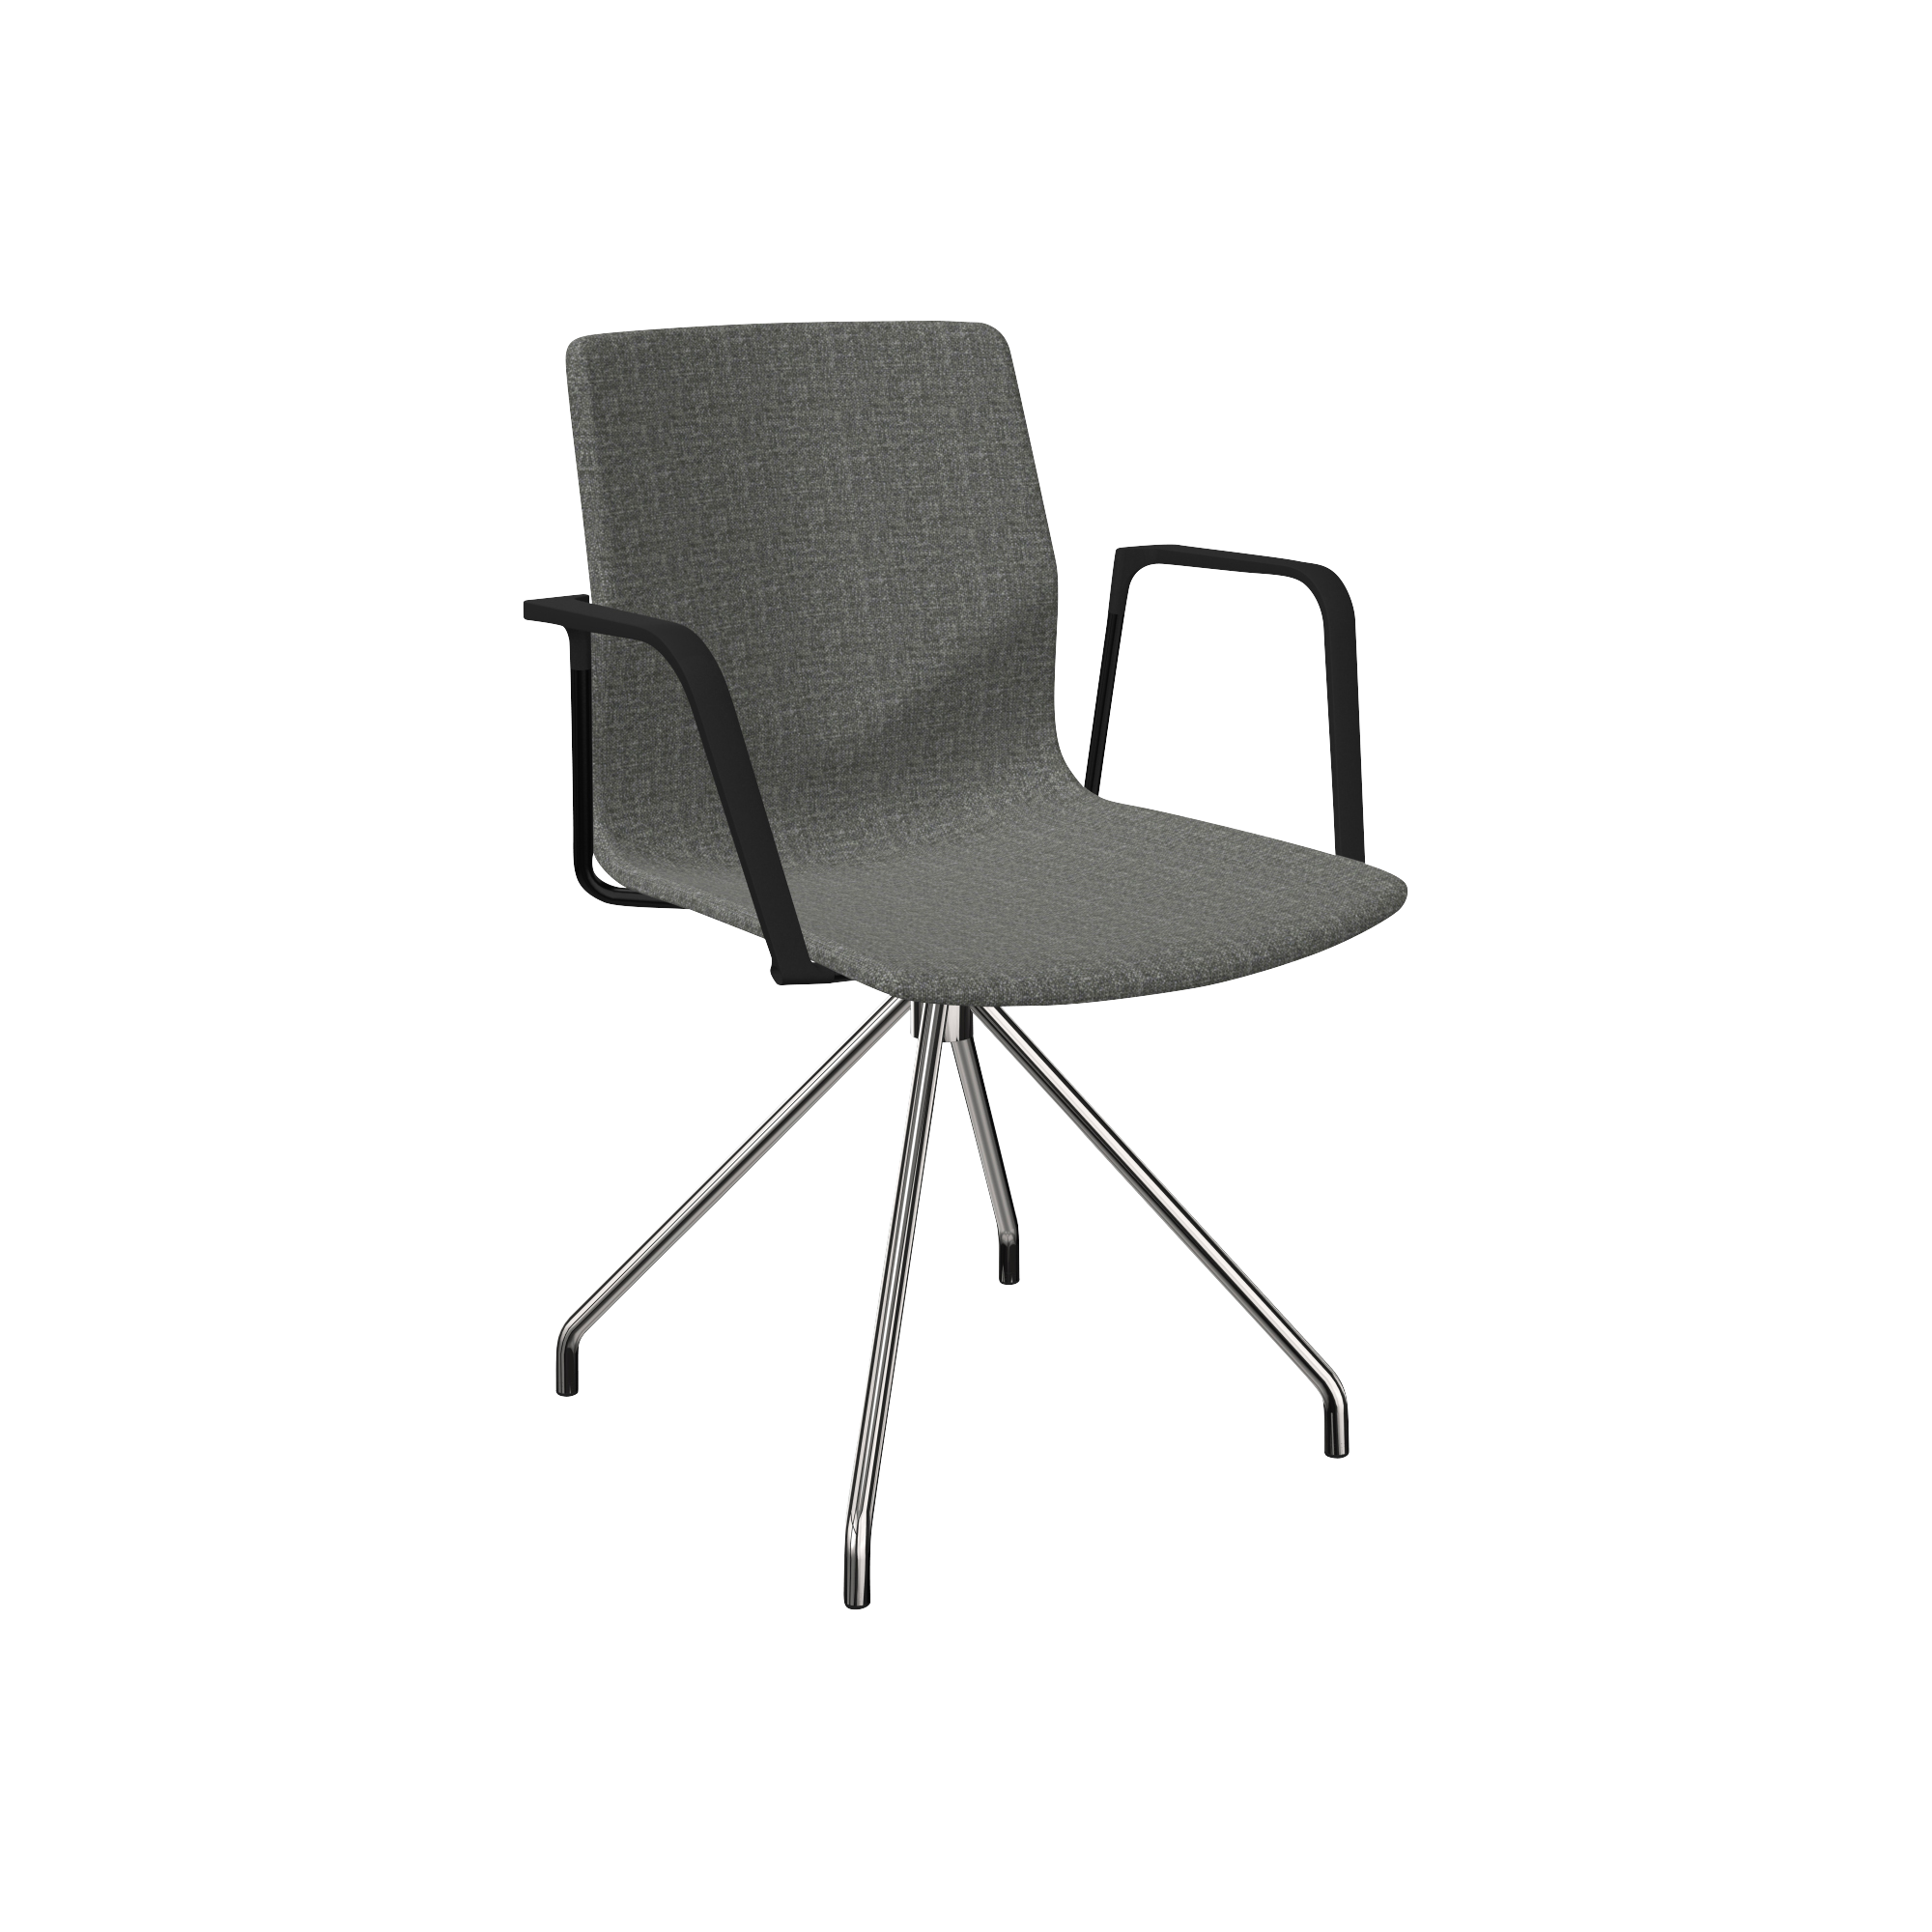 A black chair with a metal frame